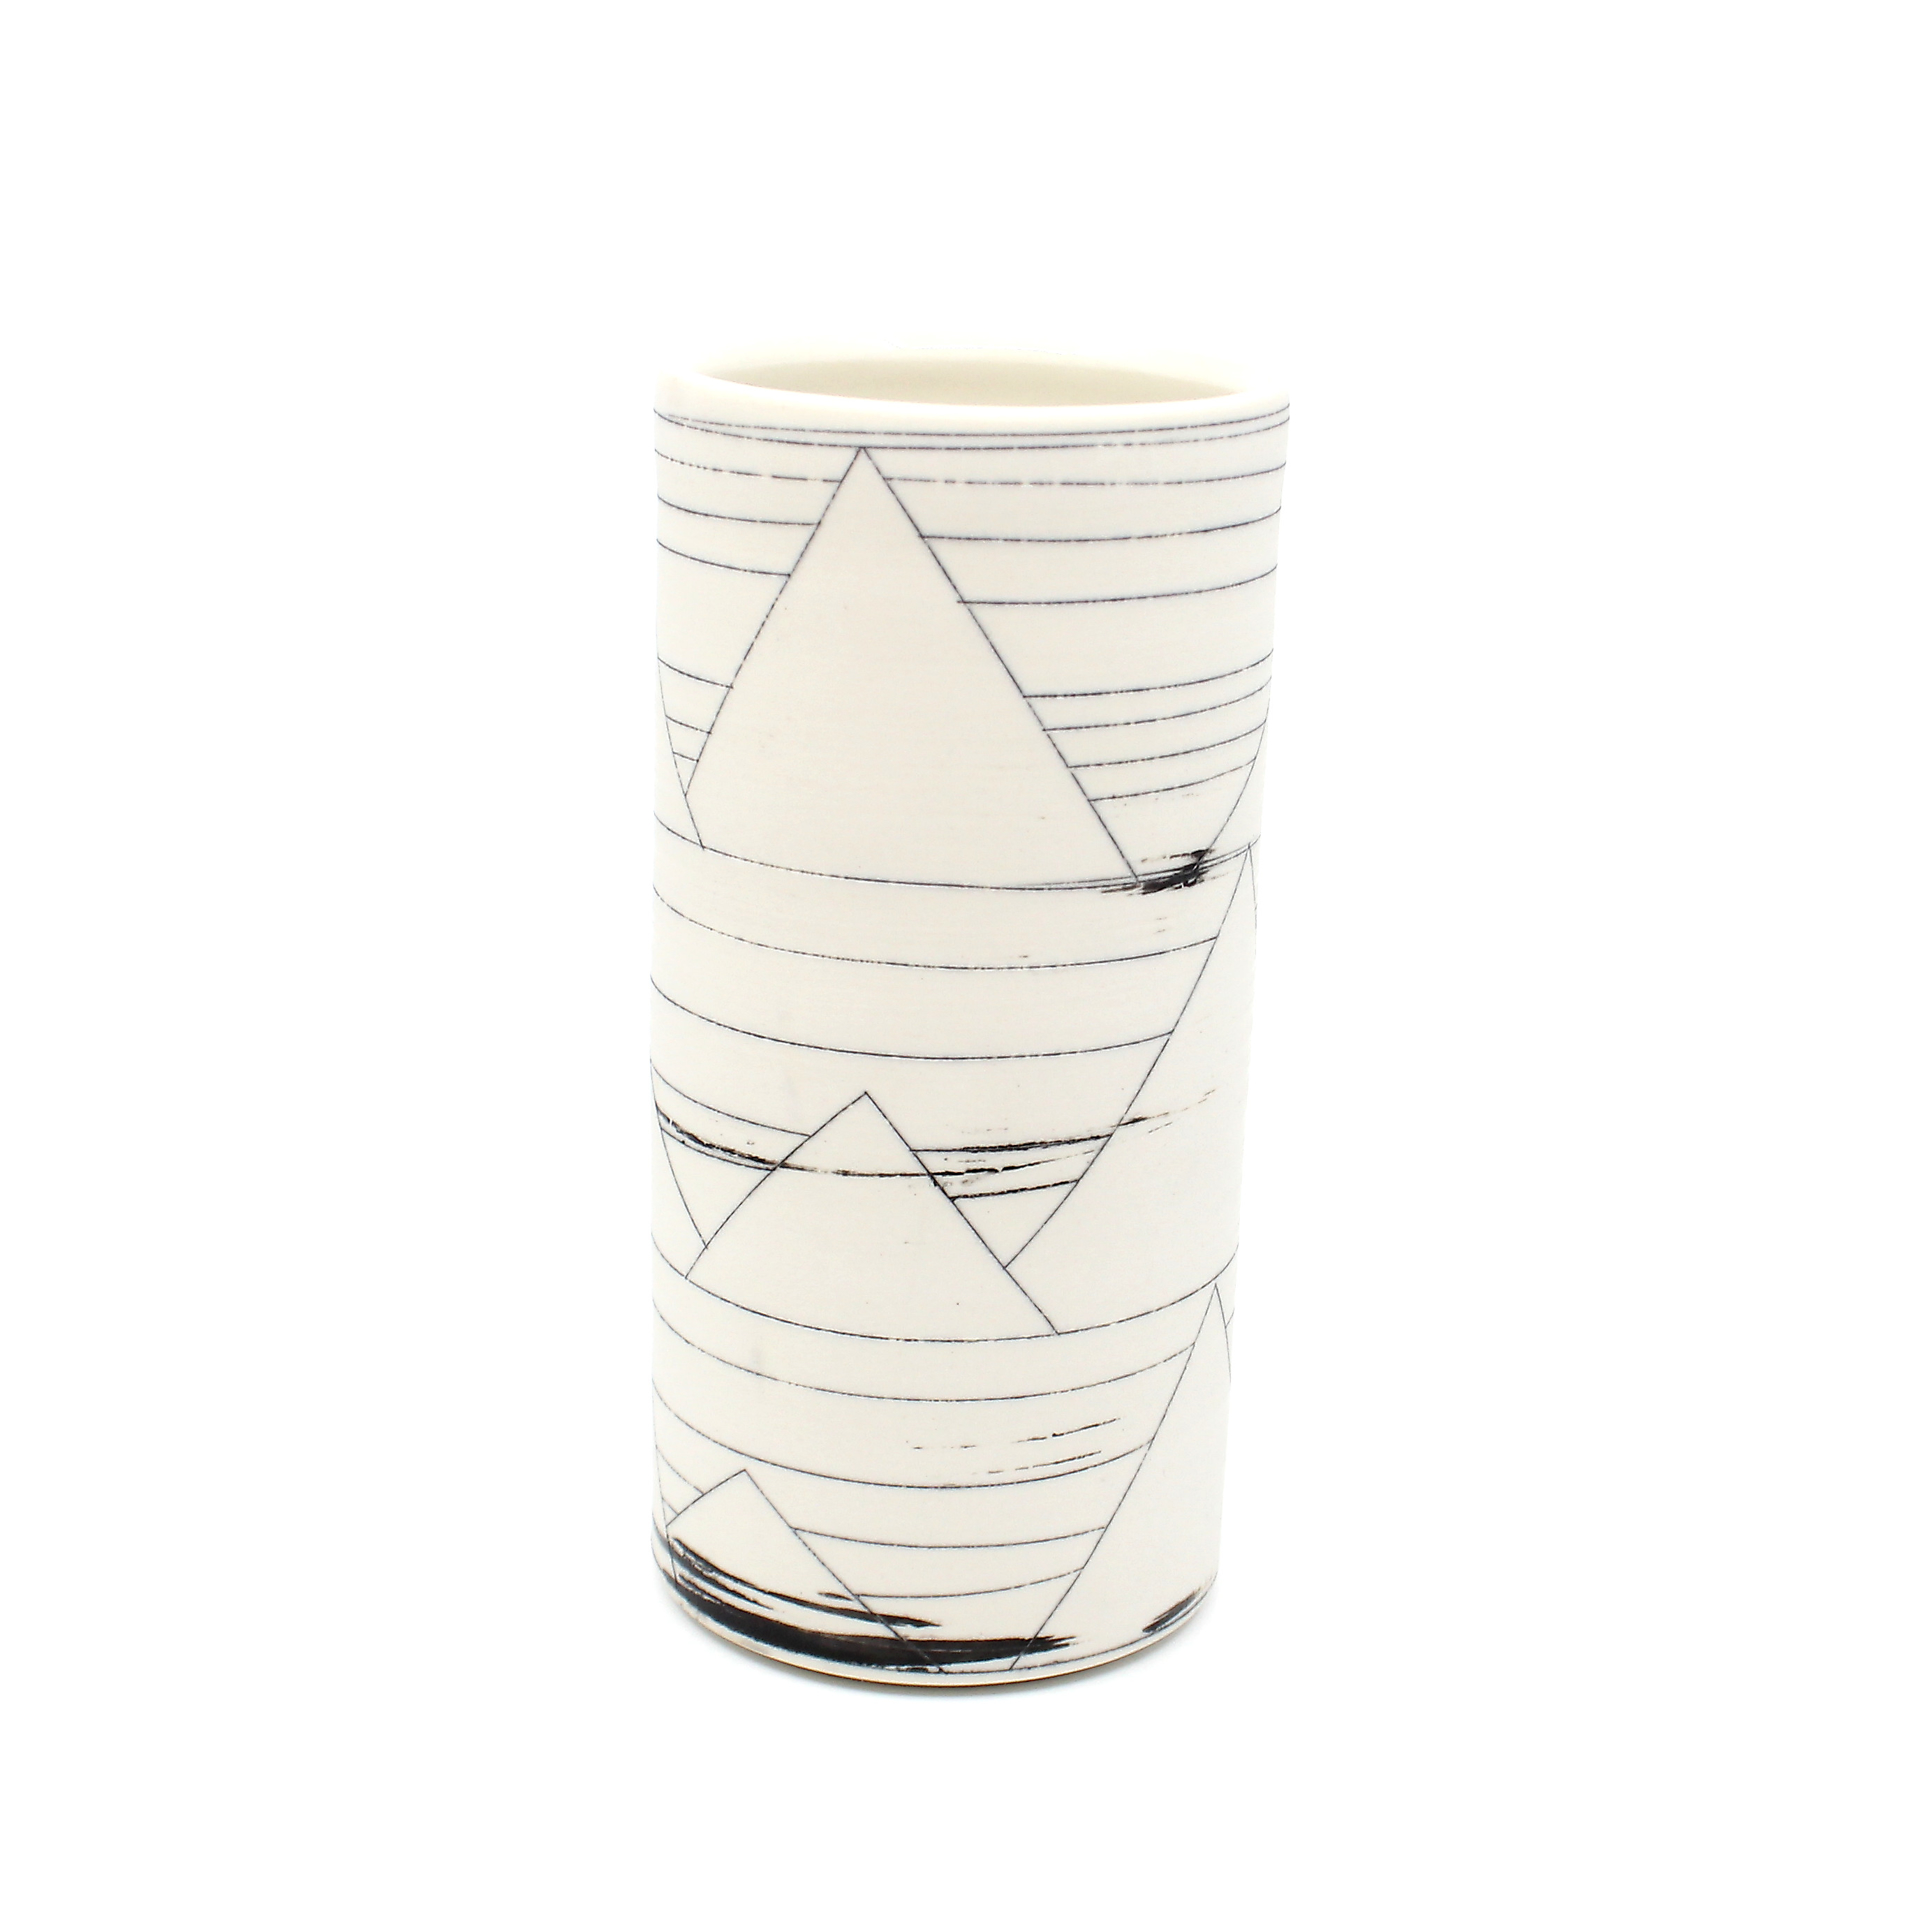 Cup (Mountains & Lines) by Bianka Groves